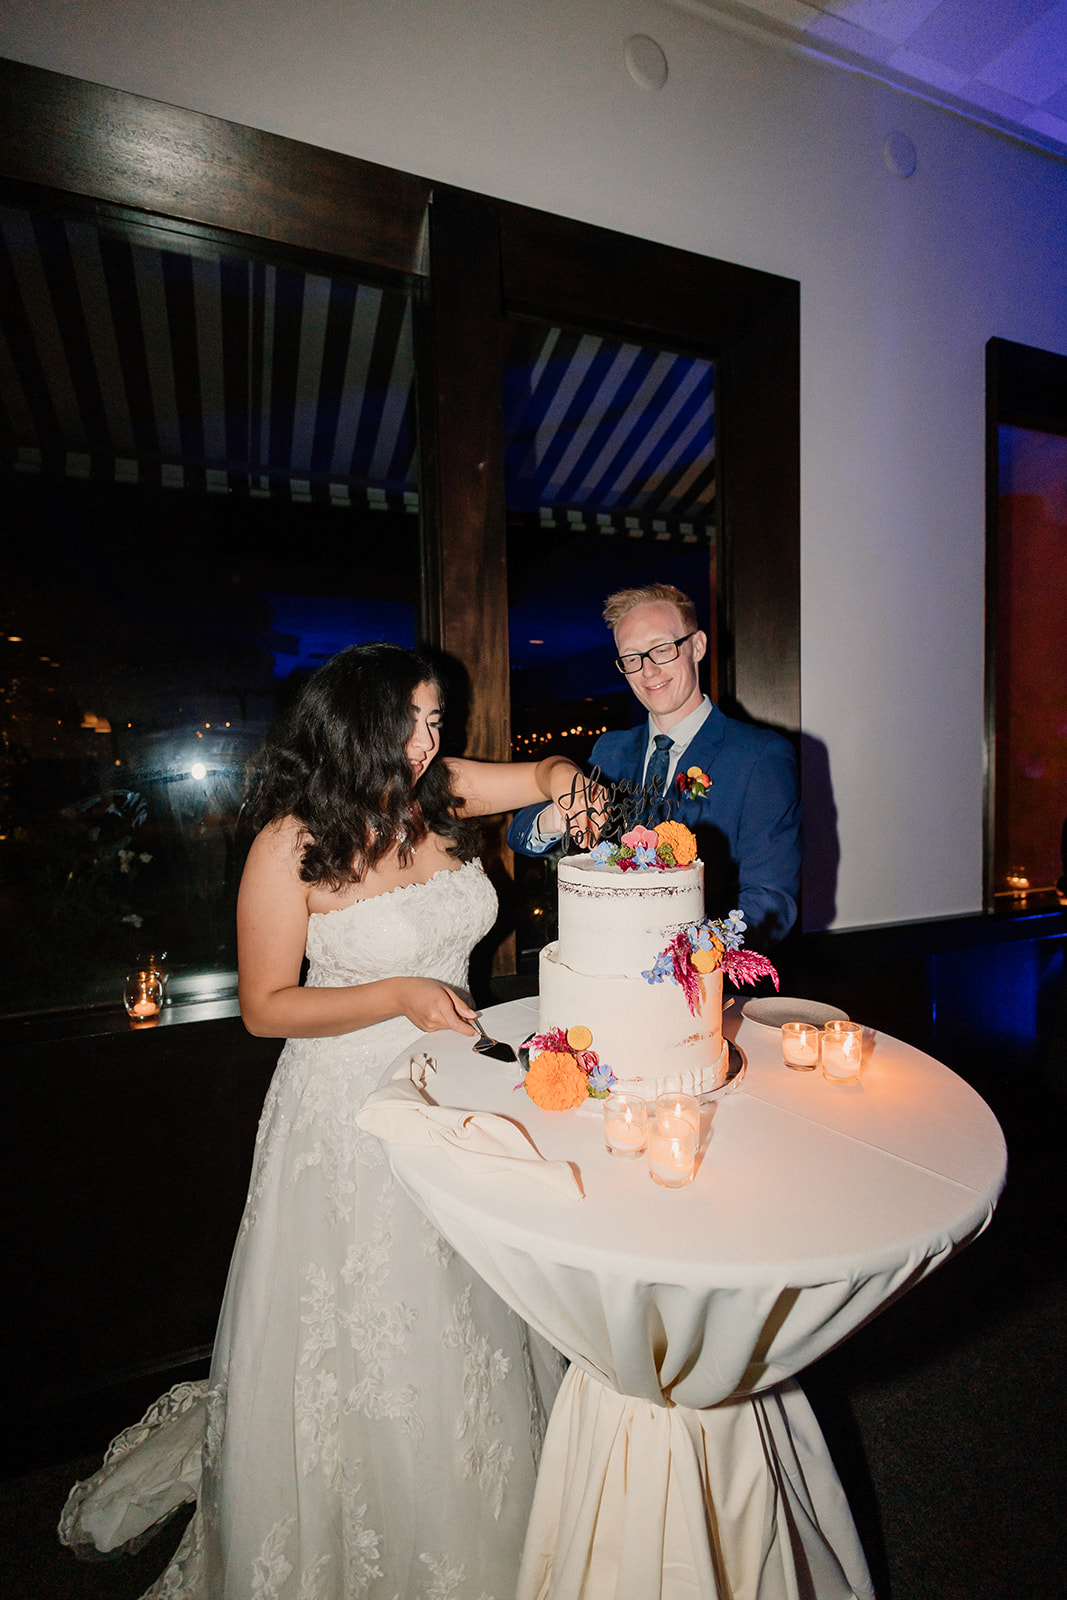 A bride and groom smiling as they cut a wedding cake together at an evening reception.